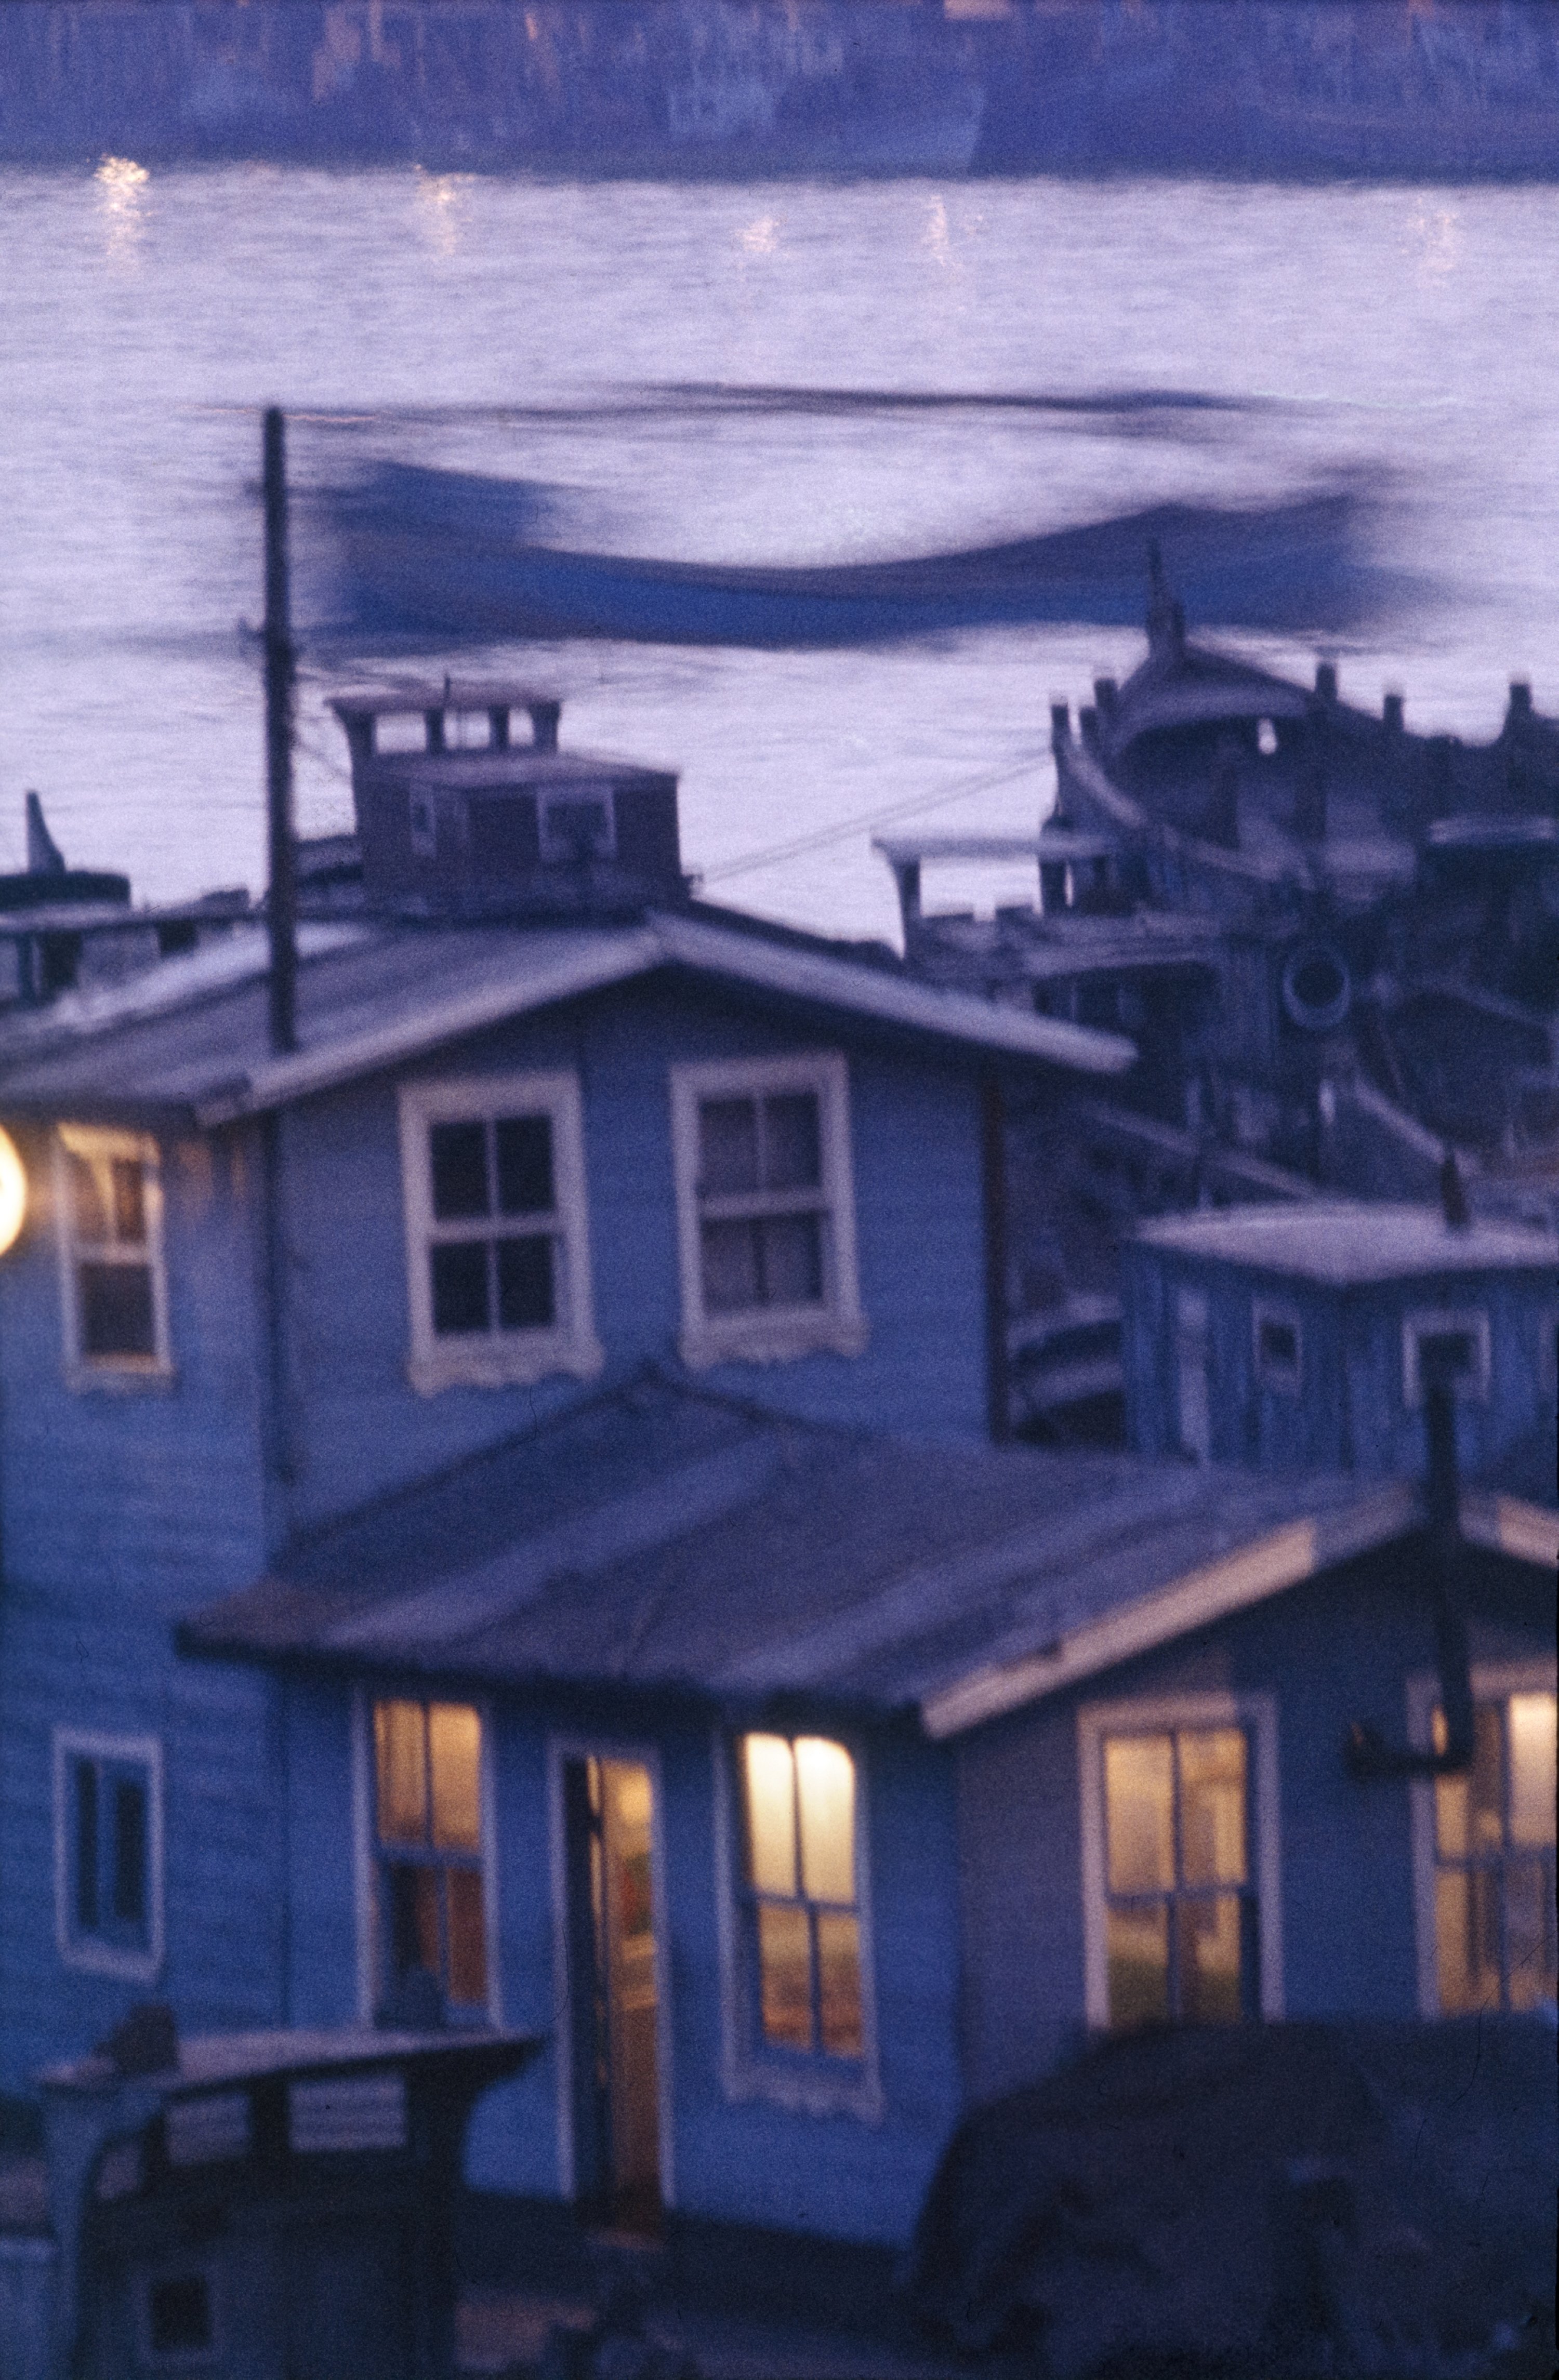 One of the photographs from the 'Memory of the Shore' exhibition brought to life from Ara Güler's archives by the Ara Güler Museum, Istanbul, Turkey, April 4, 2022. (Photo courtesy of the organization)